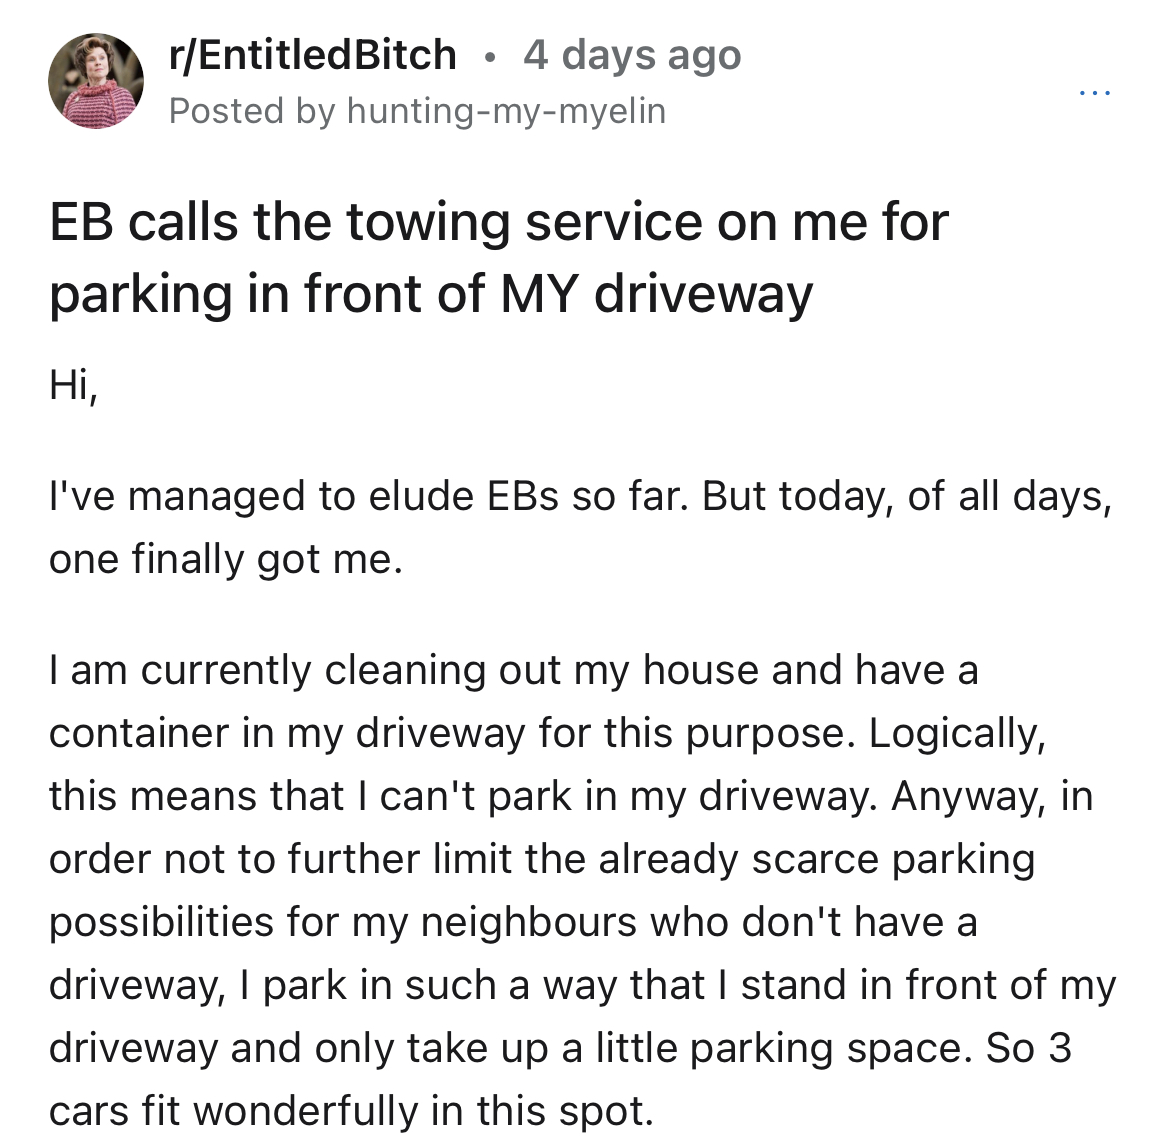 Karen stuck with bill after calling tow truck - document - rEntitledBitch 4 days ago Posted by huntingmymyelin Eb calls the towing service on me for parking in front of My driveway Hi, I've managed to elude Ebs so far. But today, of all days, one finally 